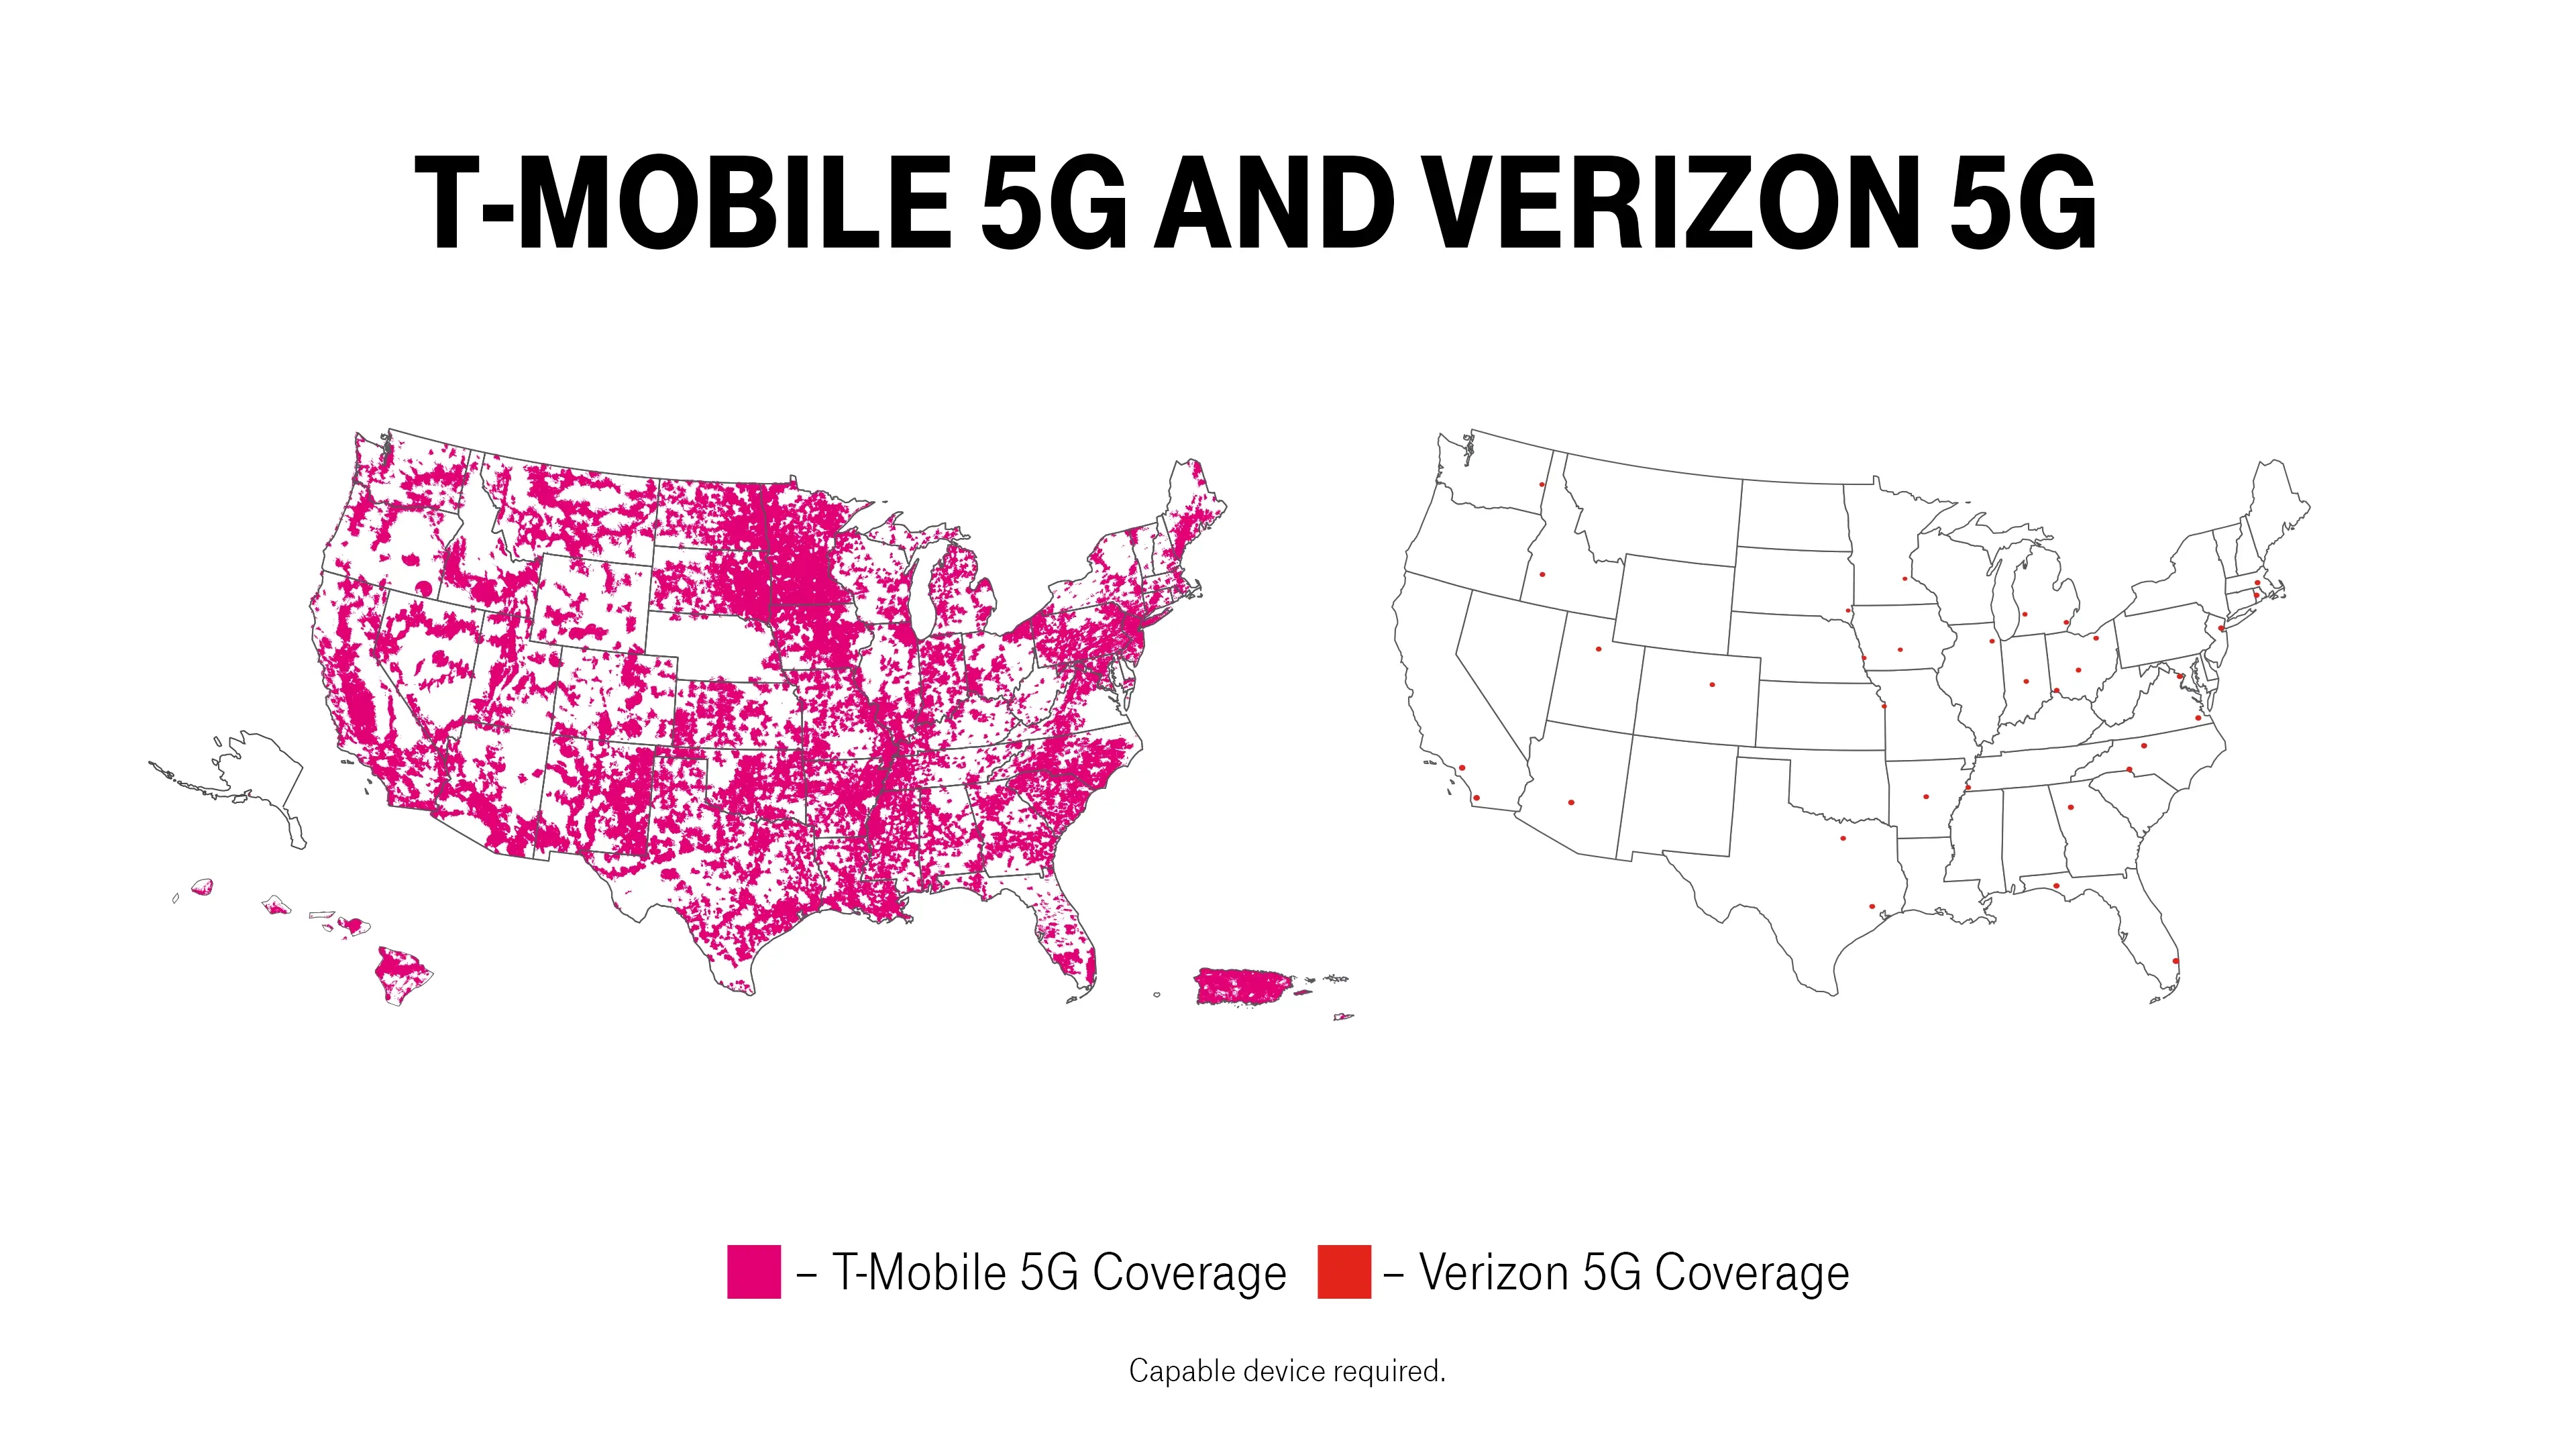 T-Mobile is killing Verizon and AT&T in the 5G race - Beginner Tech